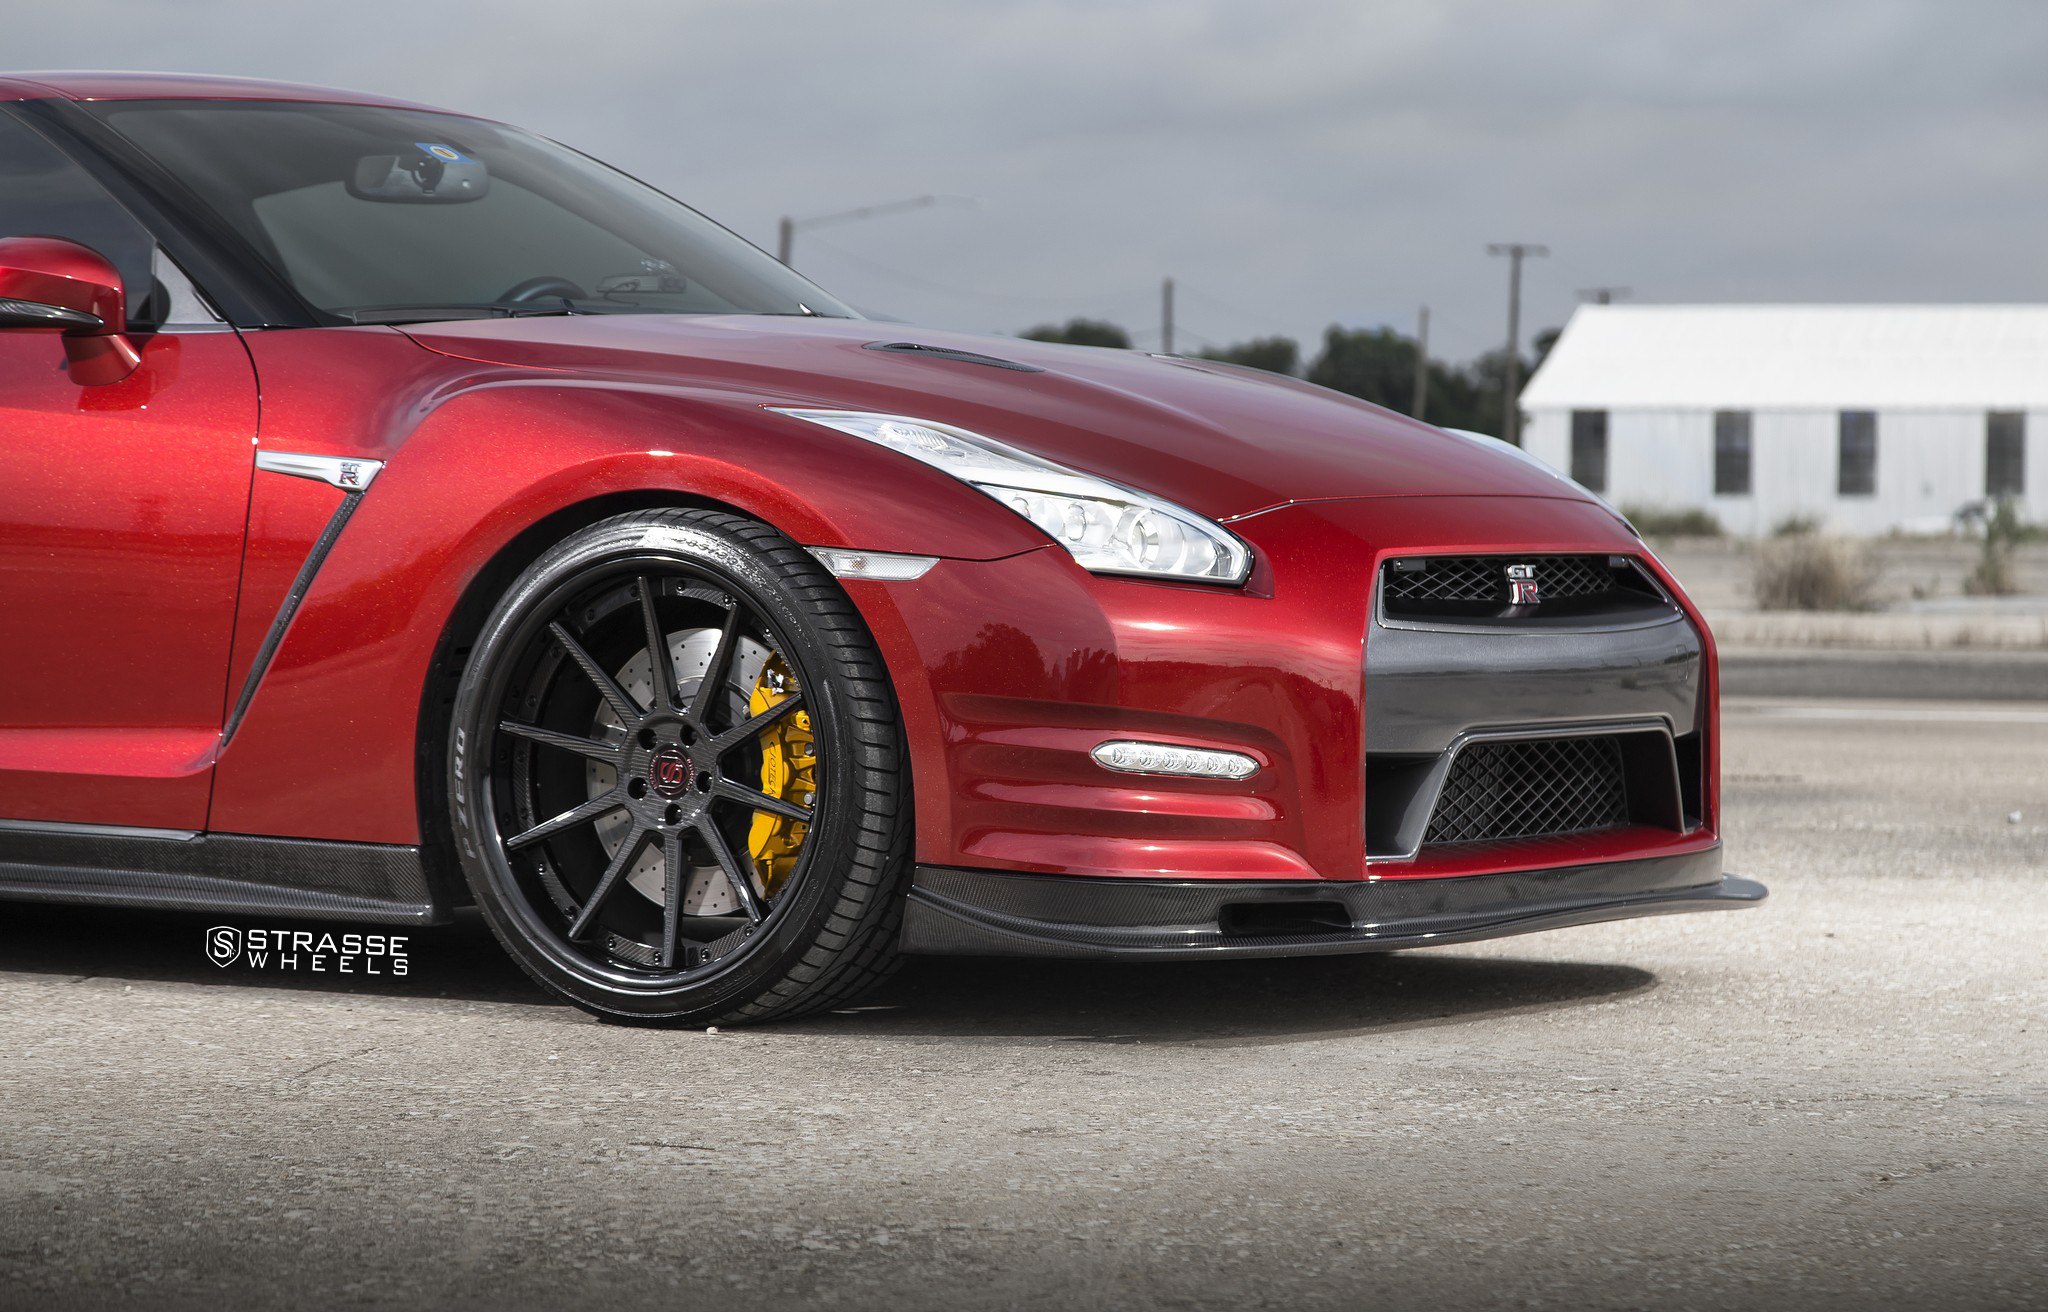 Crystal Clear Headlights on Red Nissan GT-R - Photo by Strasse Forged